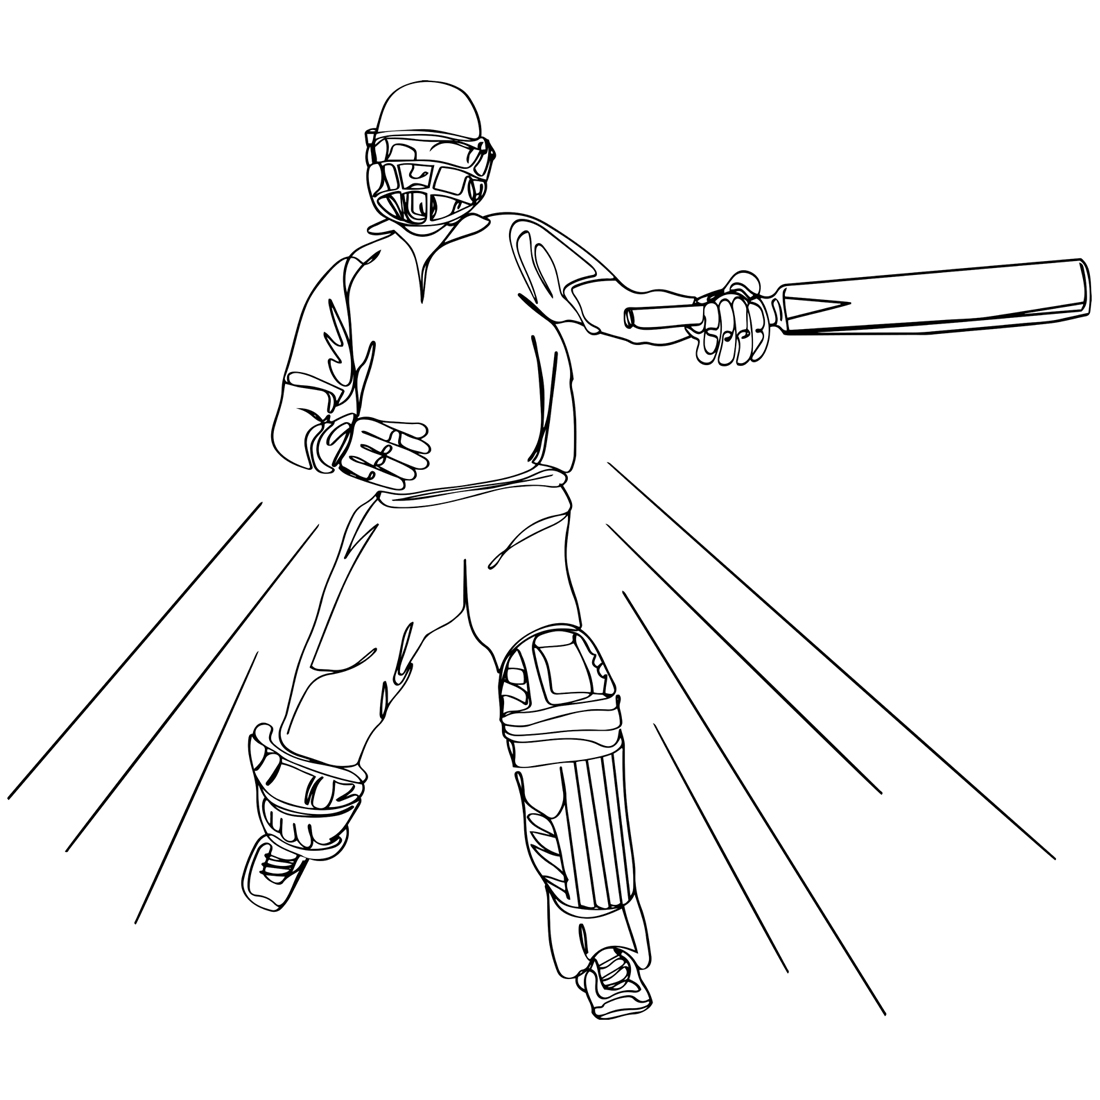 Victorious Jubilation: Hand-Drawn Illustration of Cricket Batsman's Century Leap, Cartoon Elation: Cricket Batsman Soars High in Celebration of a Century, cricket game vector preview image.